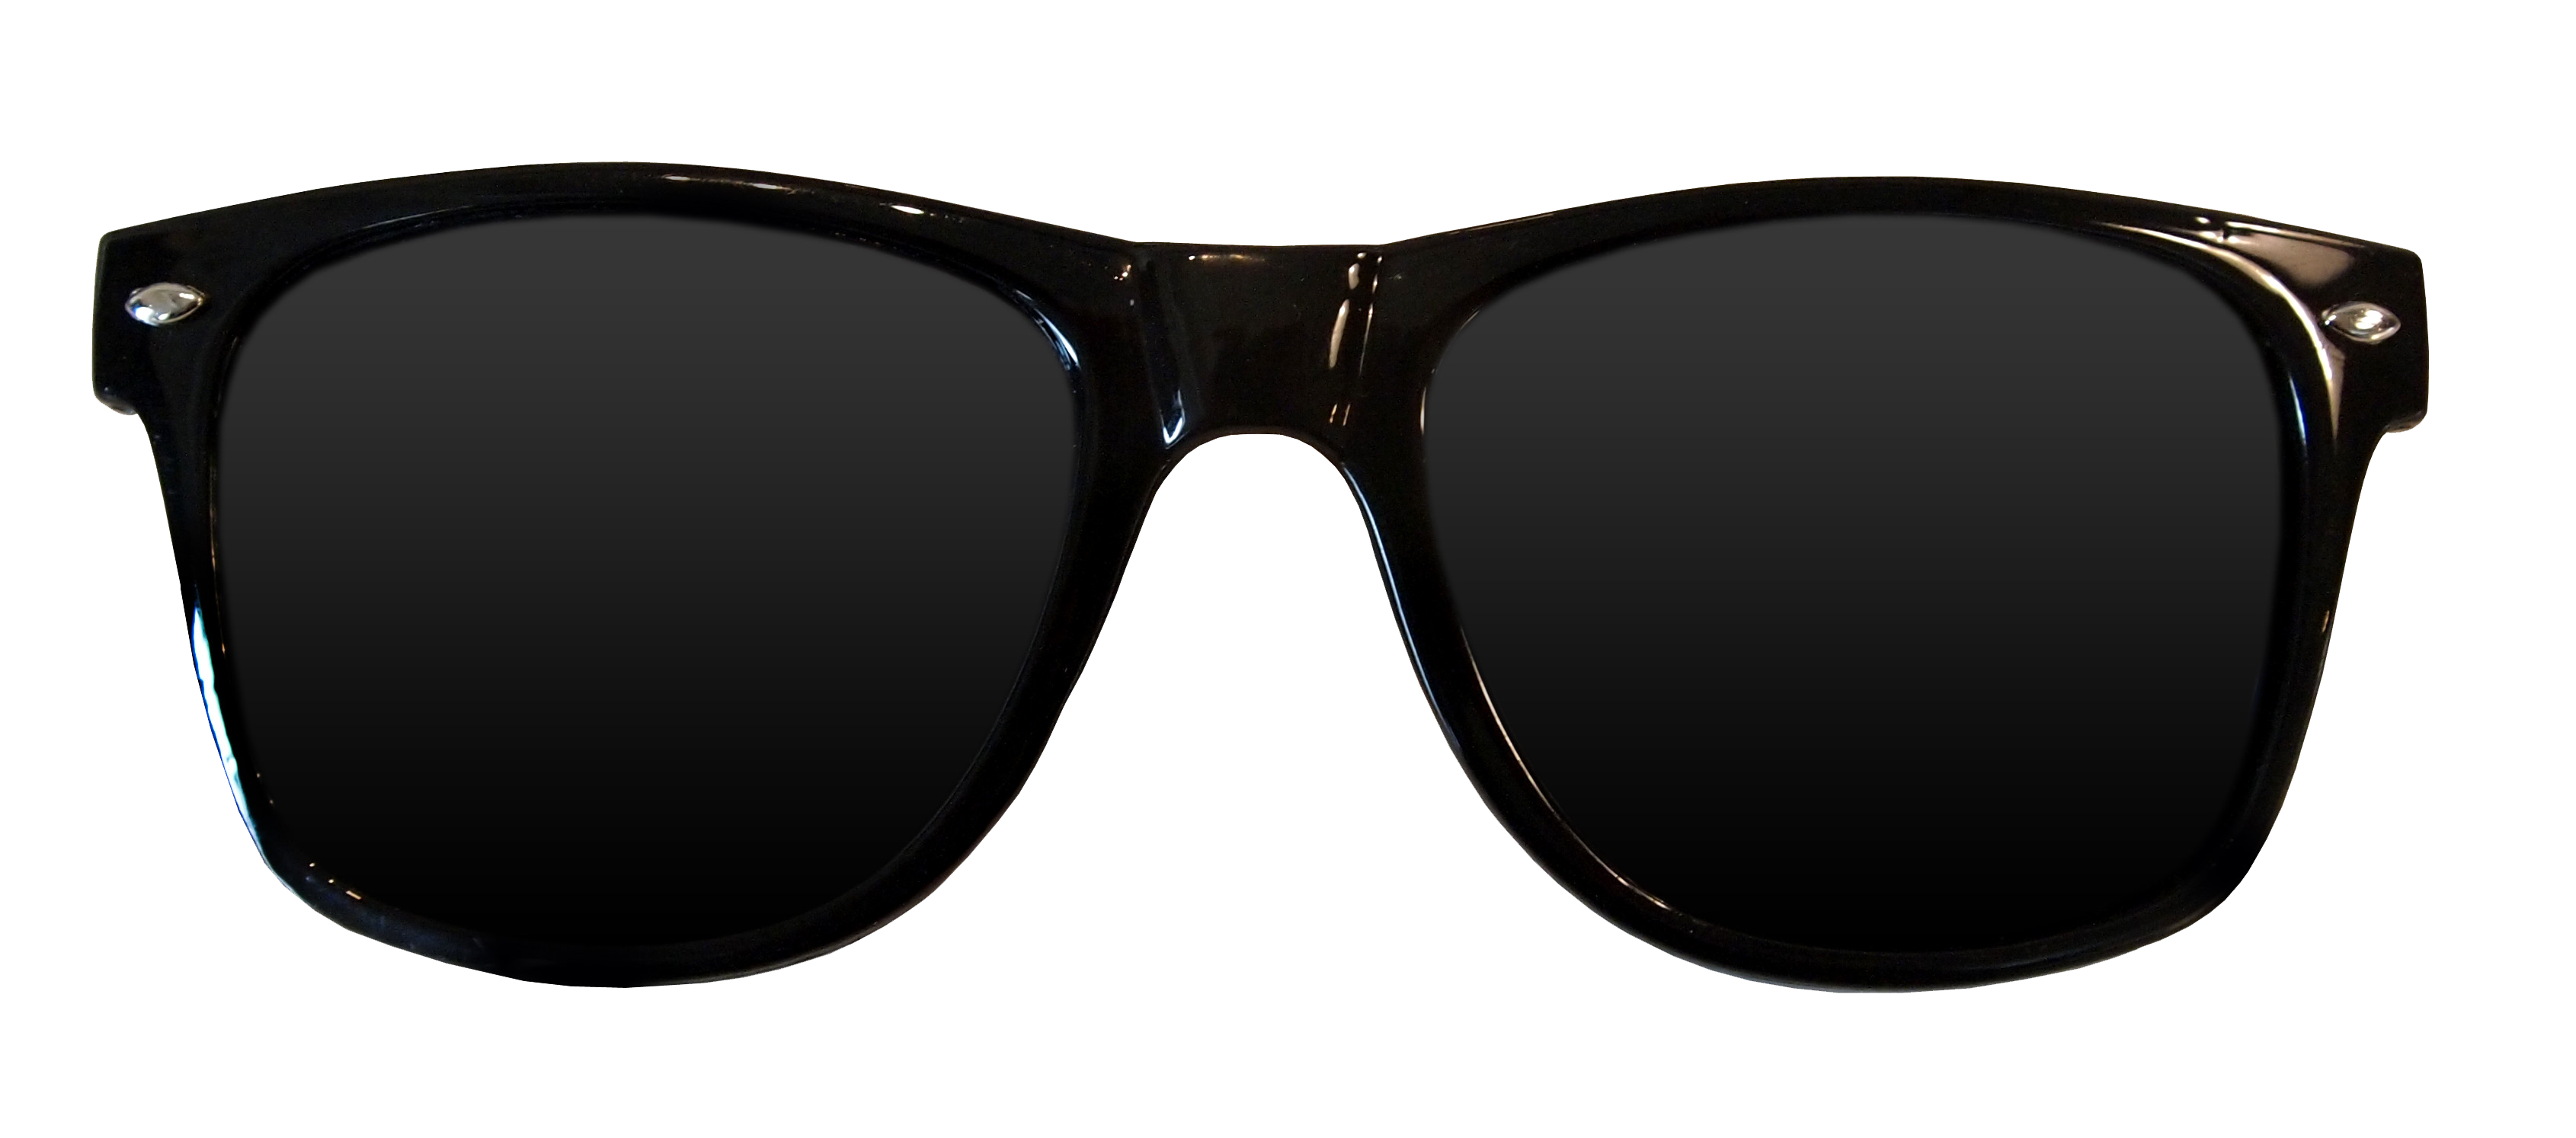 Sunglasses Png Picture PNG Im